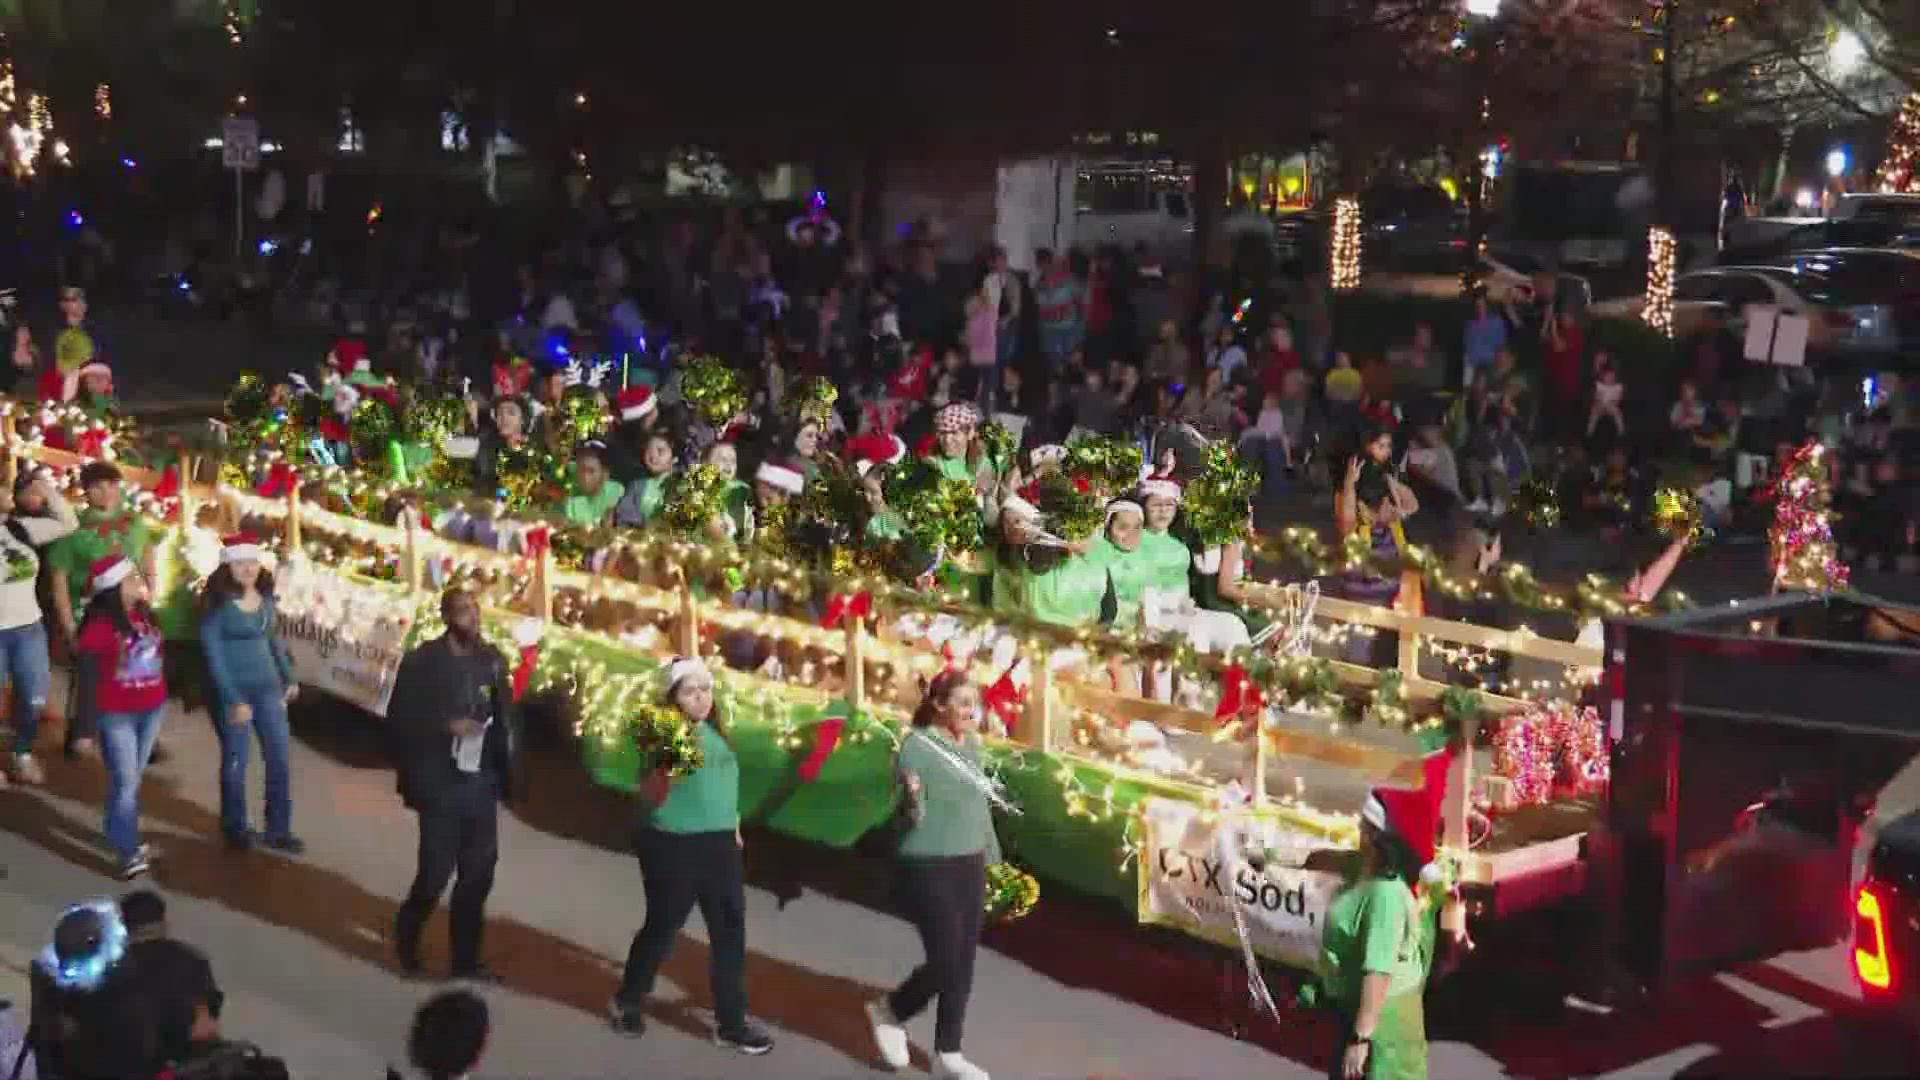 In case you missed the parade in person, you can watch the entire thing here with 6 News.